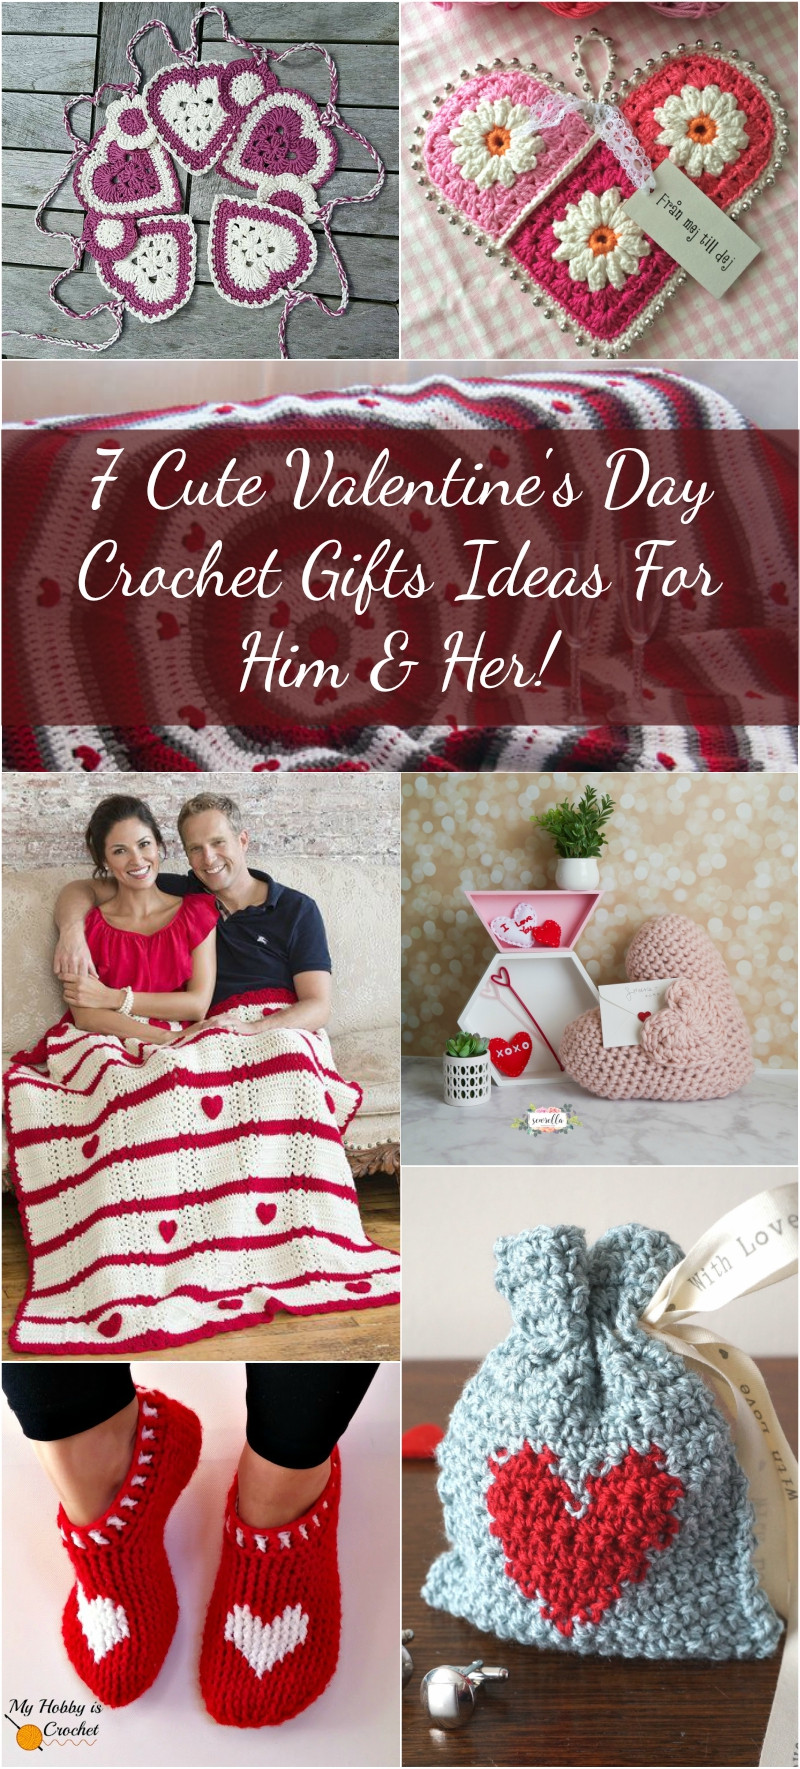 Cute Valentine Gift Ideas For Him
 7 Cute Valentine s Day Crochet Gifts Ideas For Him & Her